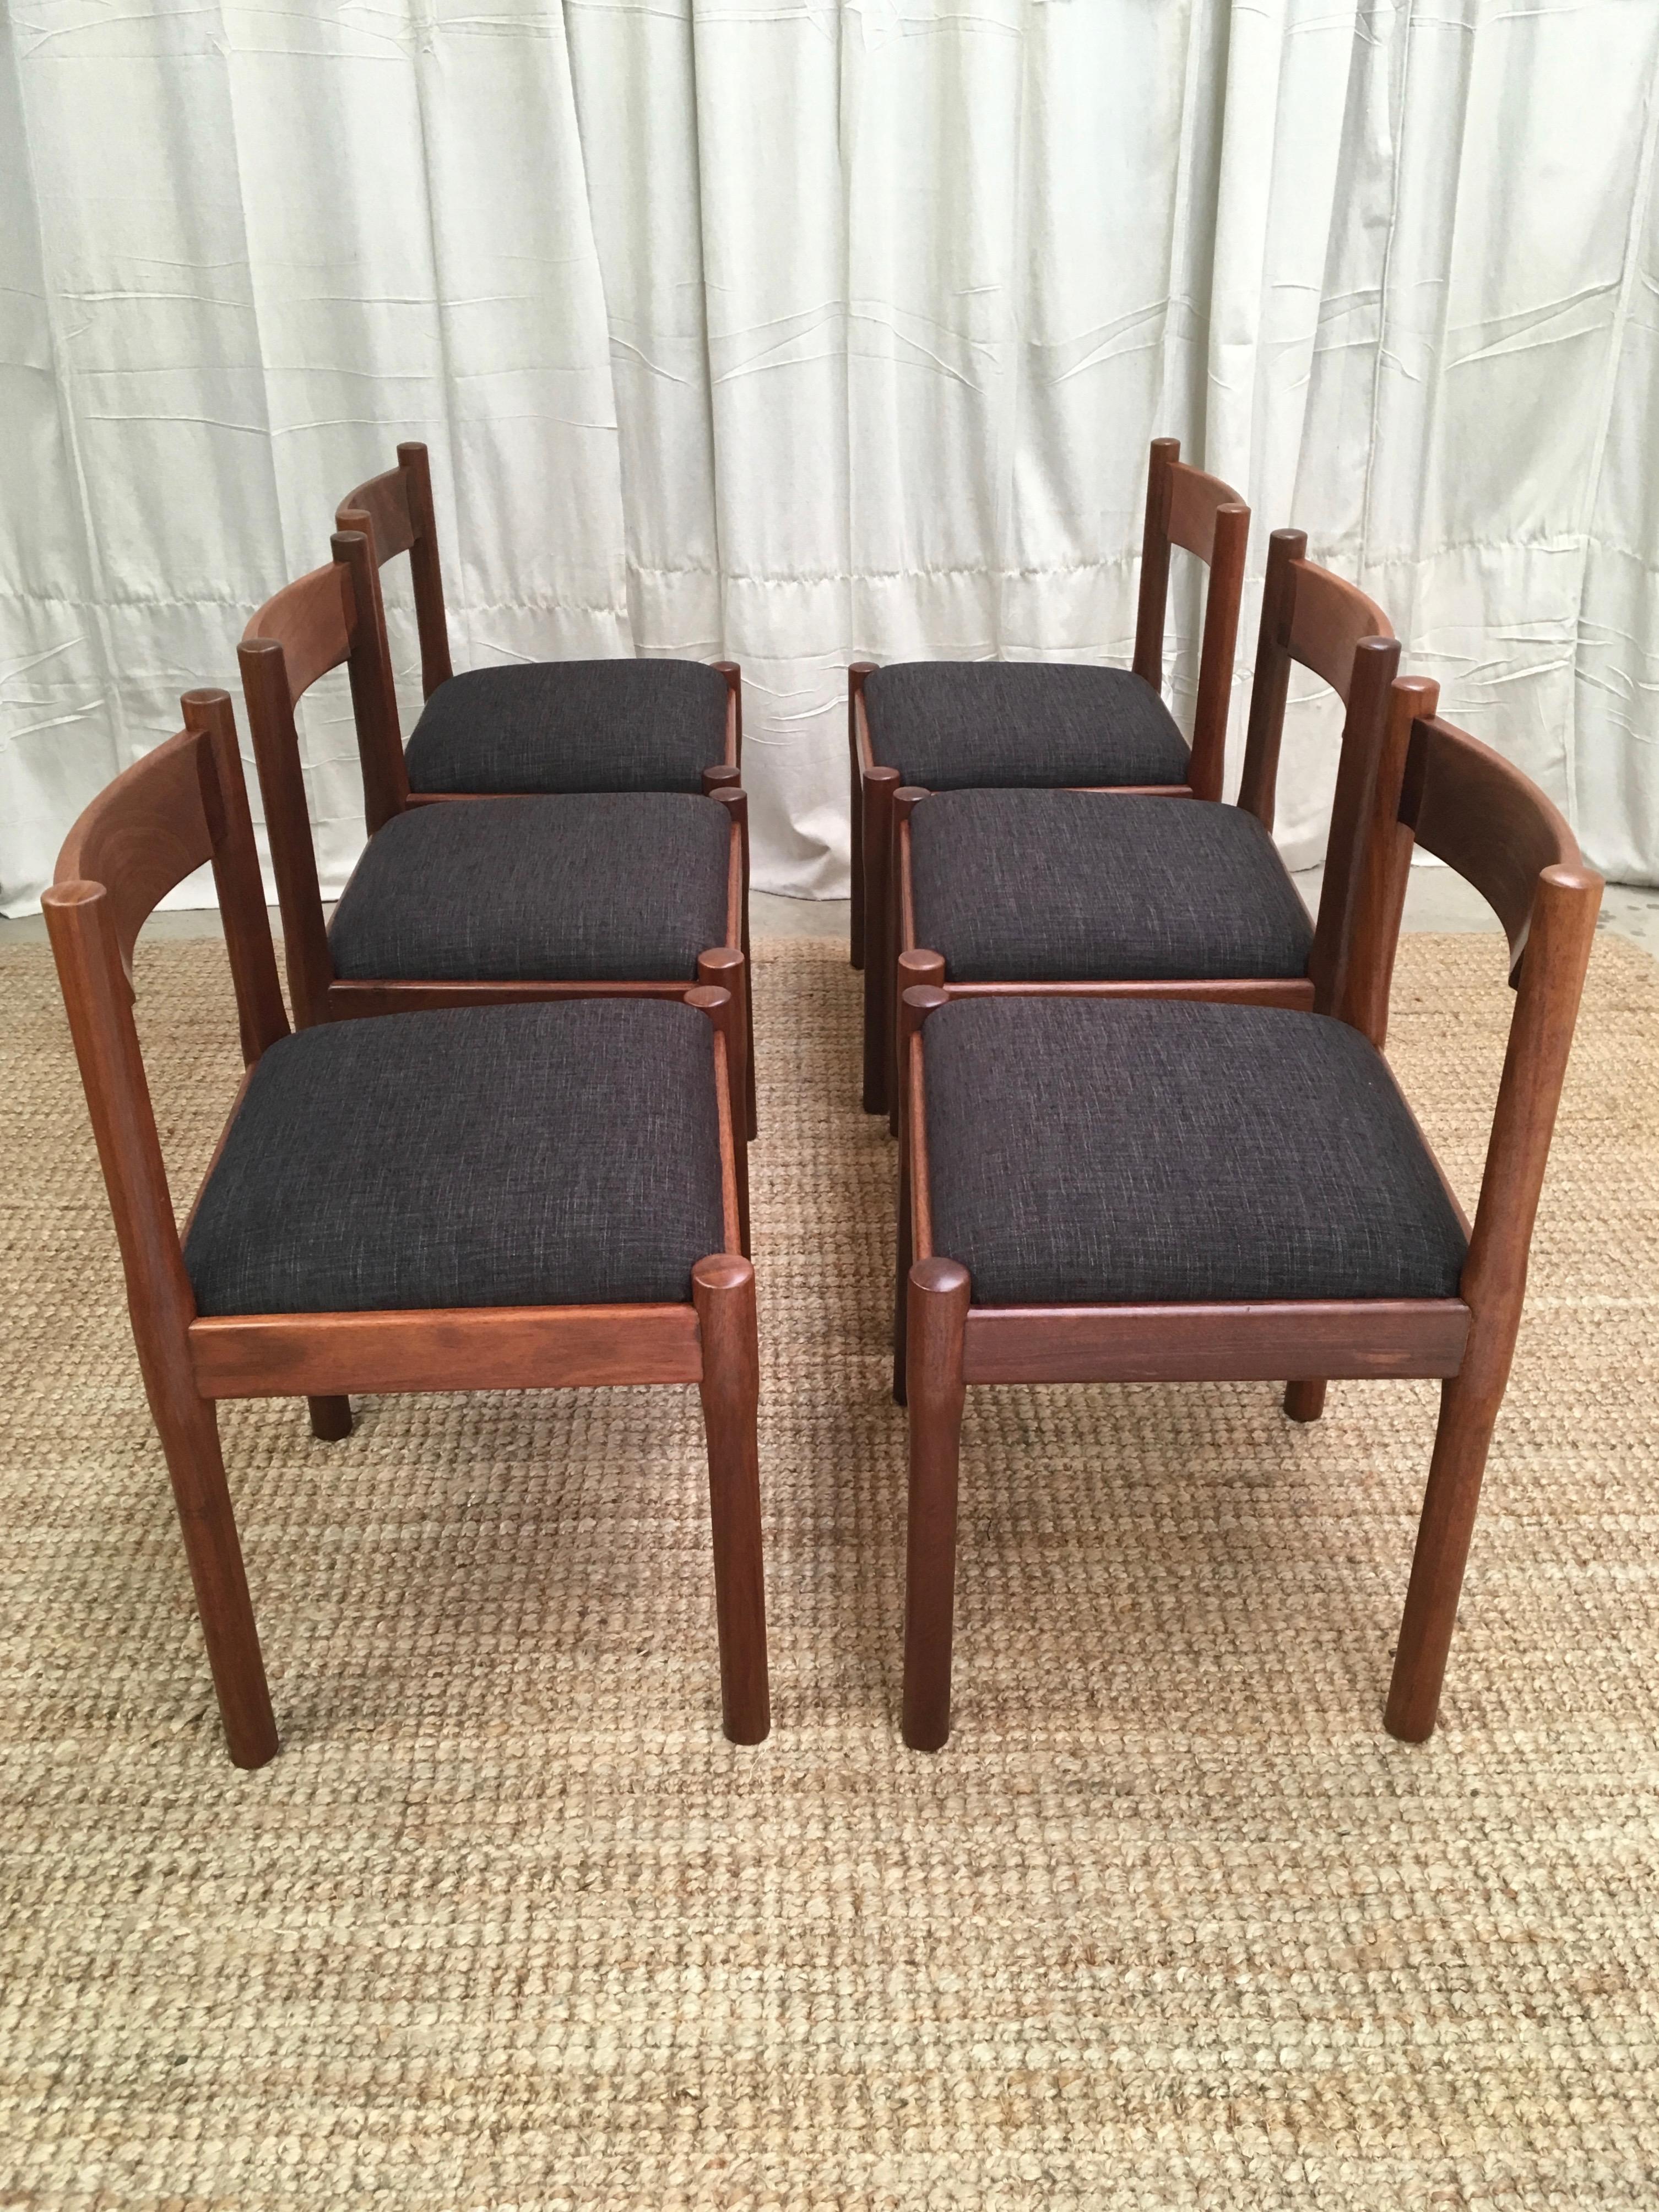 6 Carimate Chairs Magistretti , Copies by CATT Furniture, 1967 In Jarrah Timber In Good Condition In Melbourne, AU